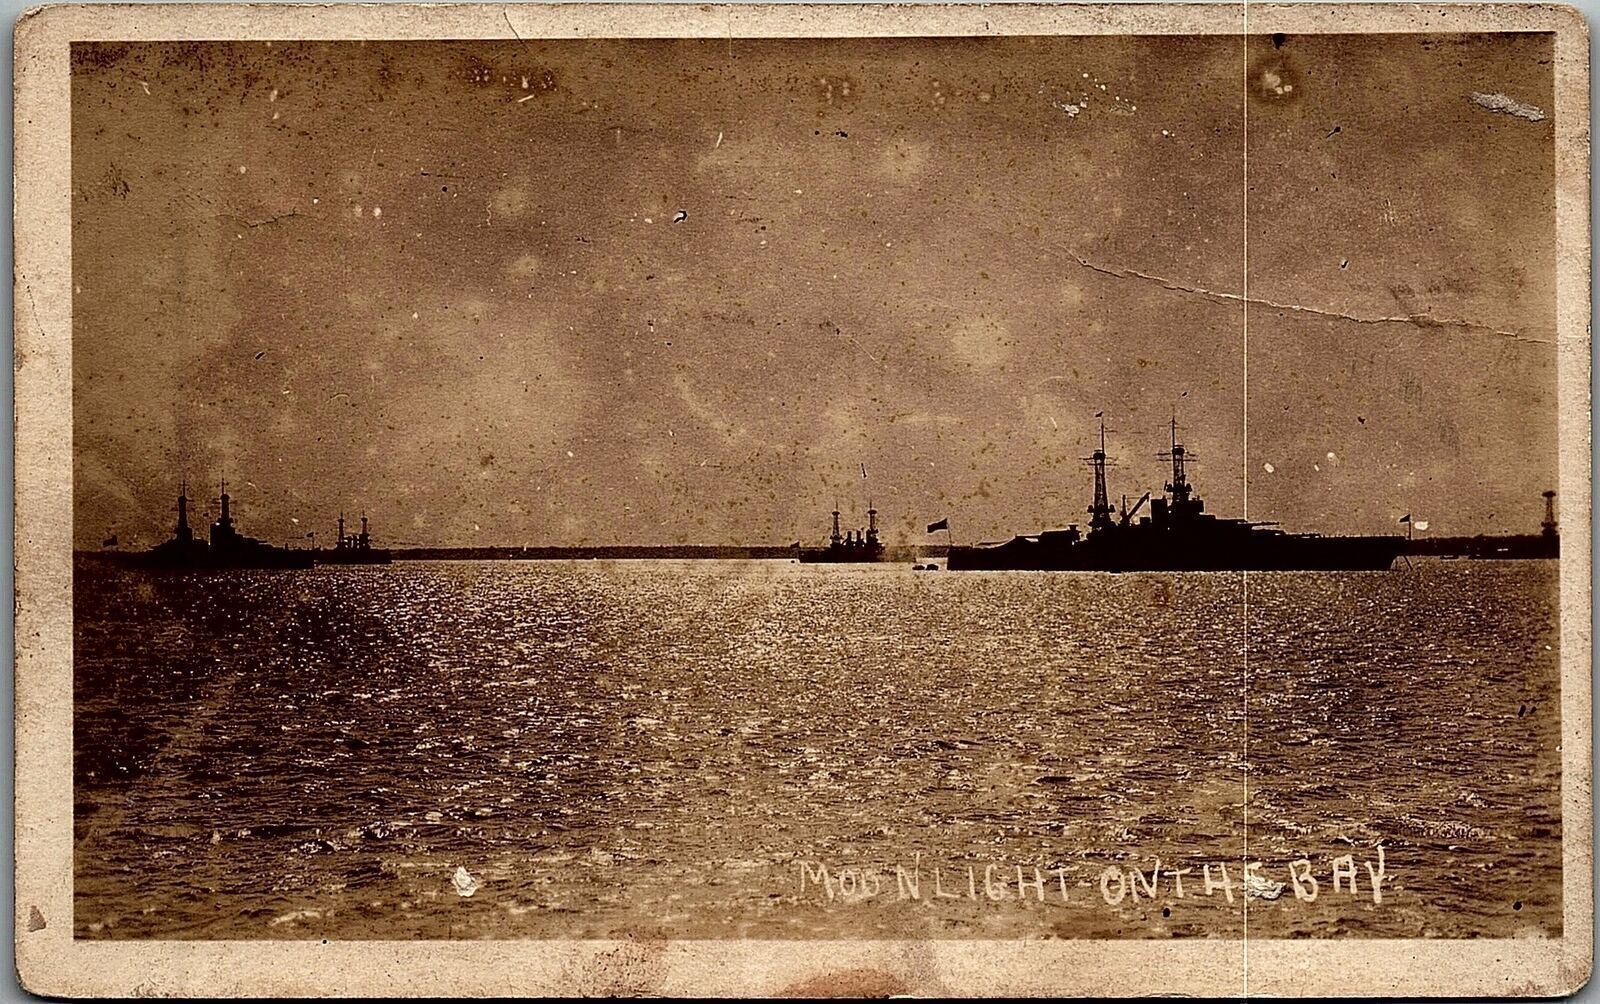 1940s WWII US BATTLESHIPS MOONLIGHT ON THE BAY REAL PHOTO POSTCARD 29-101